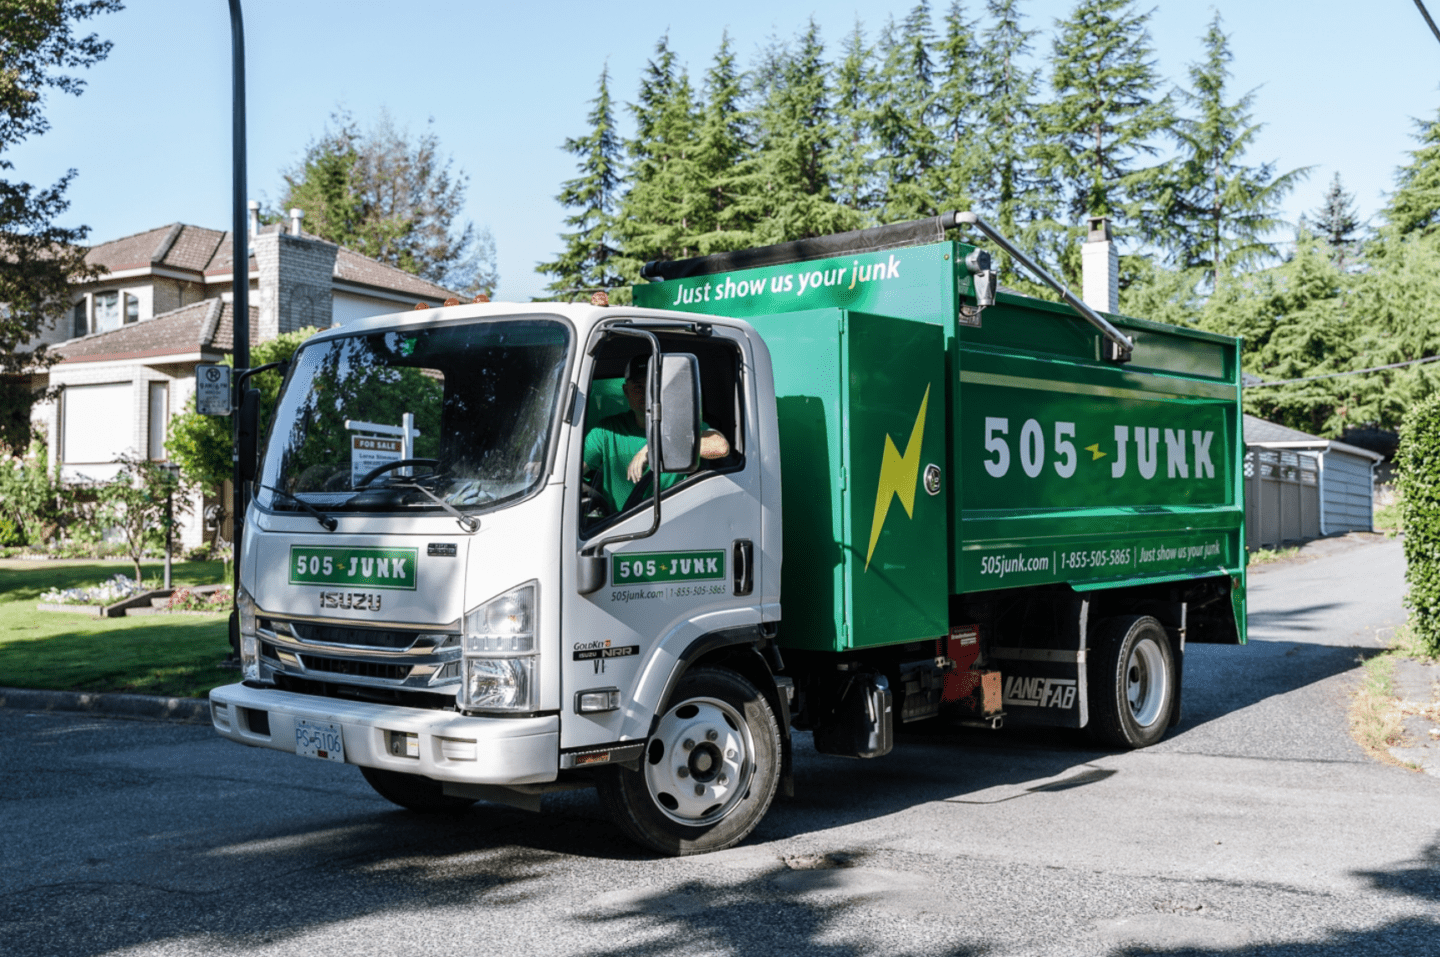 Best Junk Removal in Vancouver - 505-Junk pulling out of an alley.